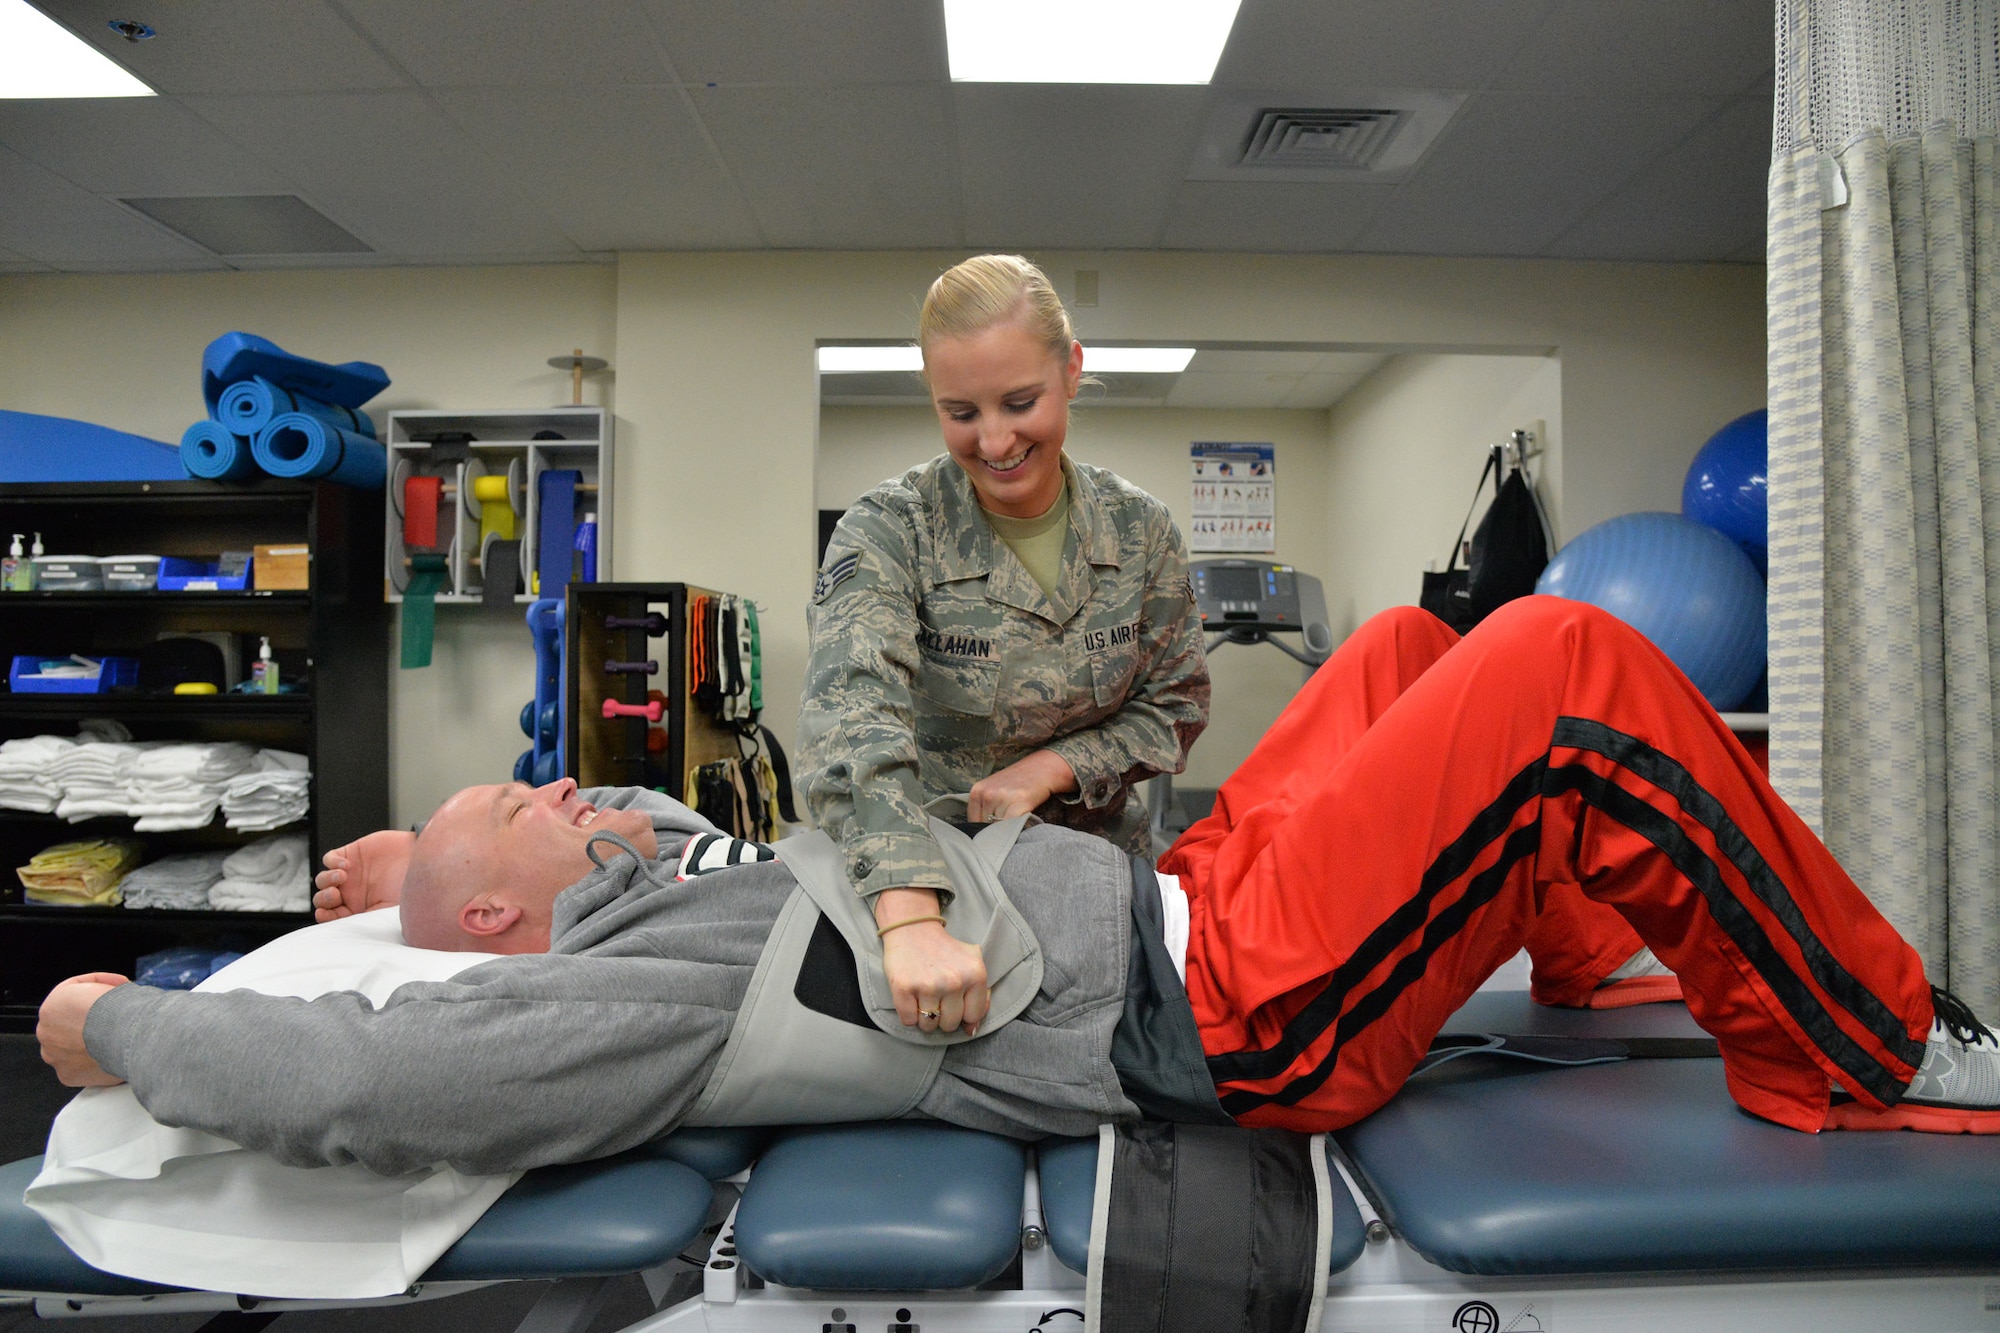 Senior Airman Kaitlyn Callahan, 341st Medical Operations Squadron physical therapy technician, performs traction on Col. Jay Folds, 341st Missile Wing vice commander, Nov. 8, 2016, at Malmstrom Air Force Base, Mont. Traction stretches the spine to assist with pain management. (U.S. Air Force photo/Airman 1st Class Daniel Brosam)